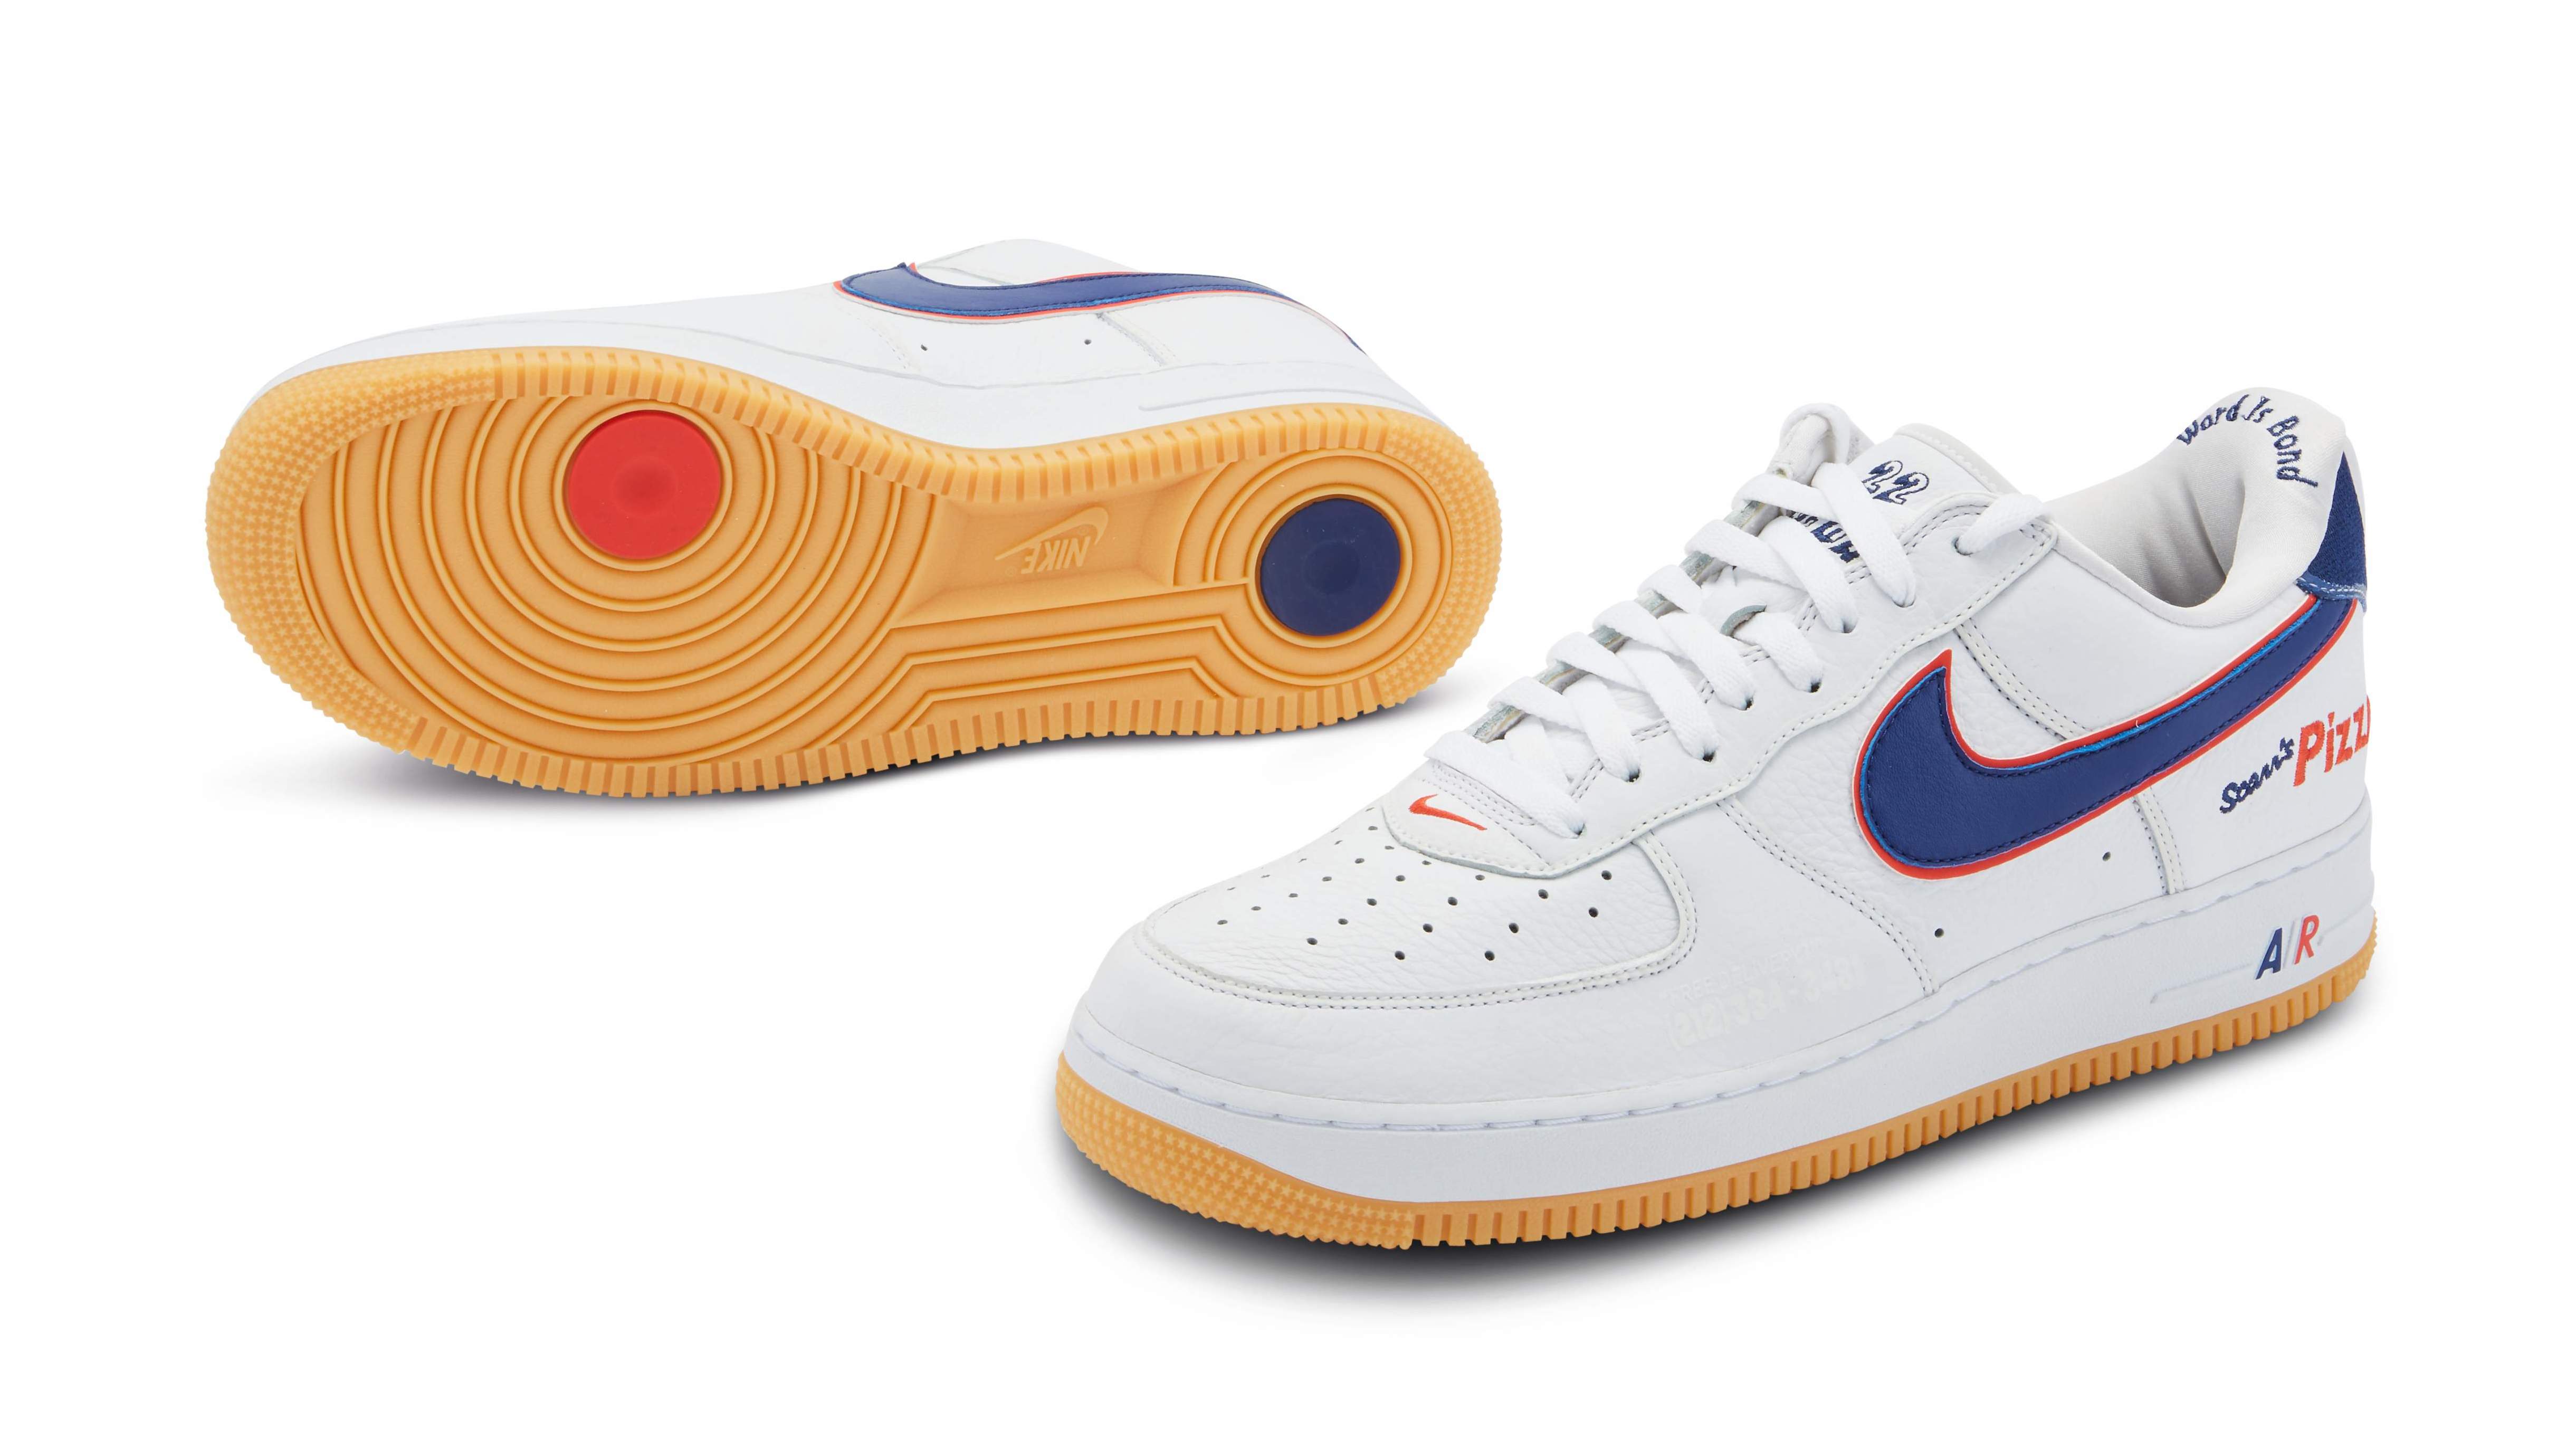 scarr's pizza air force 1 for sale